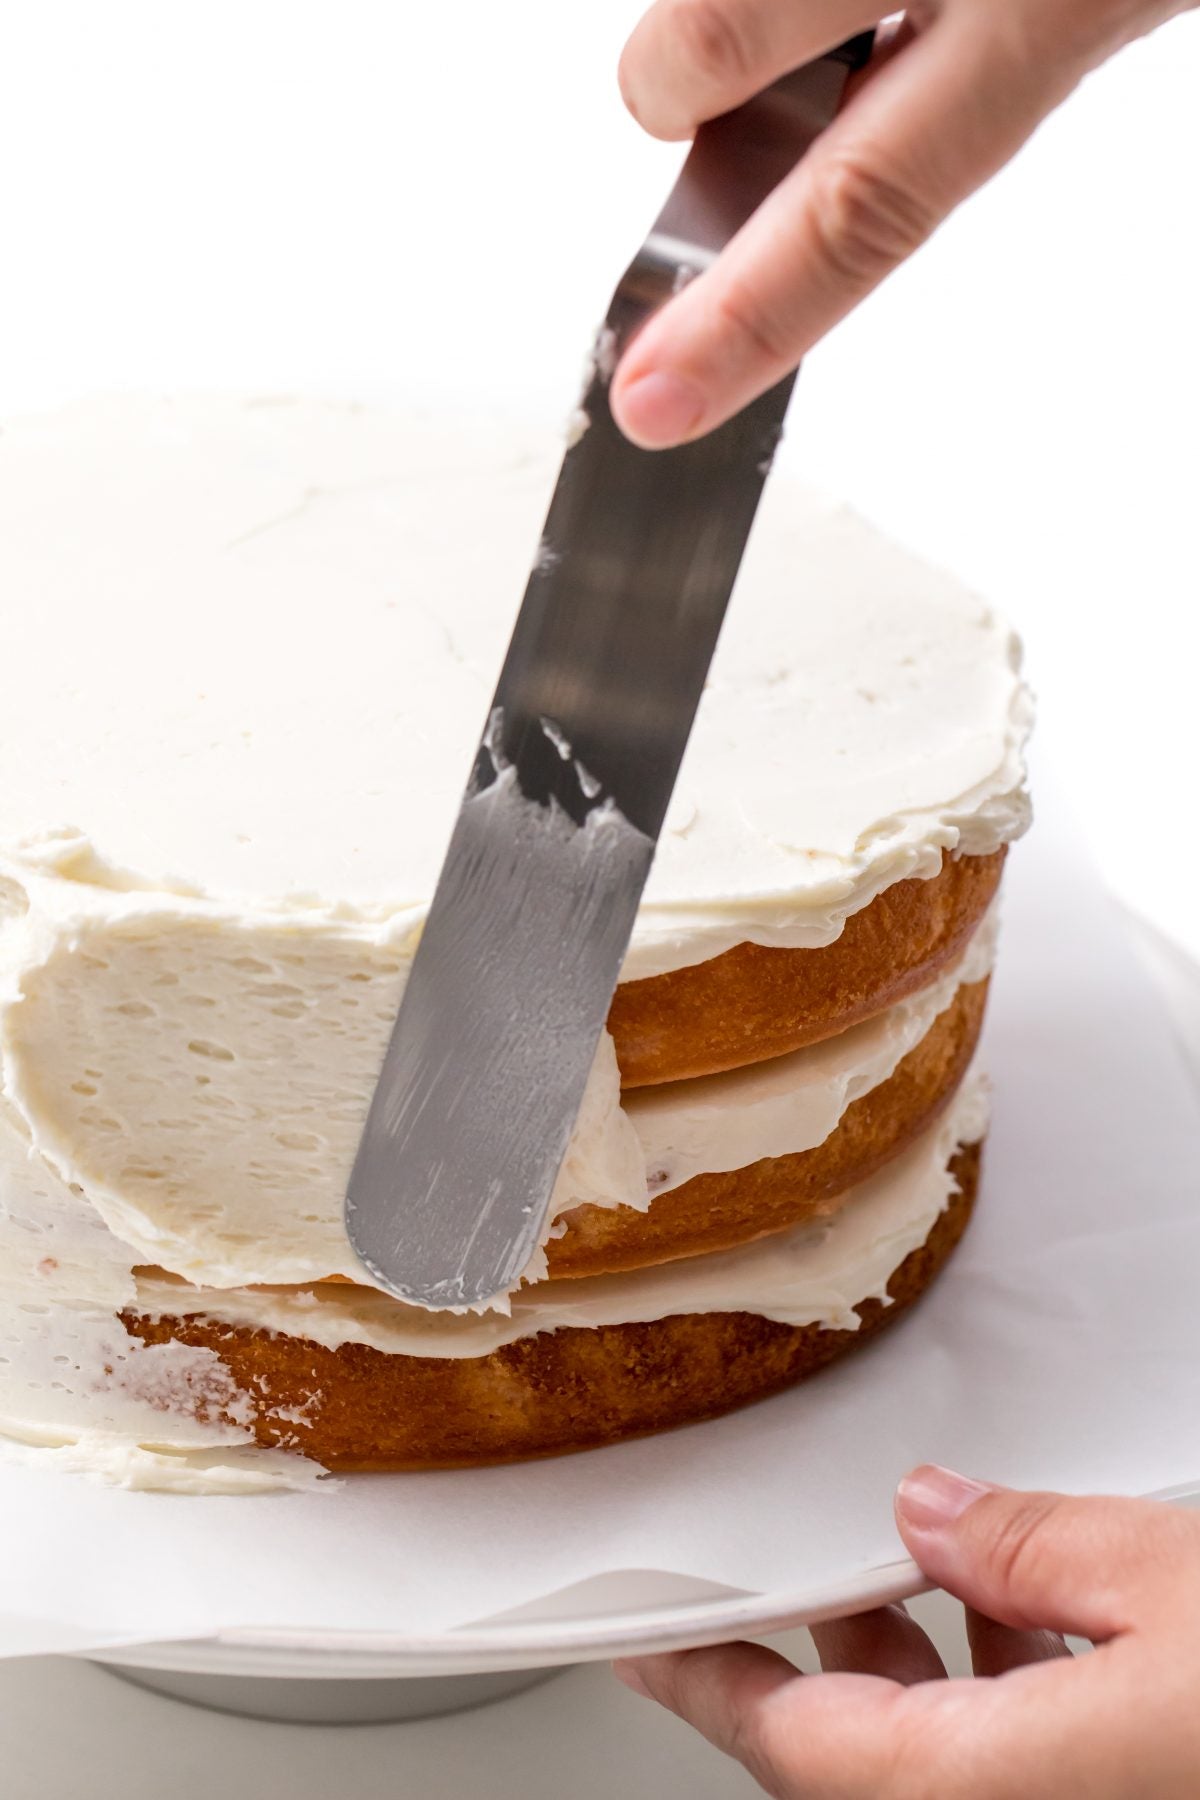 APPLY BUTTER CREAM ICING TO SIDES OF CAKE